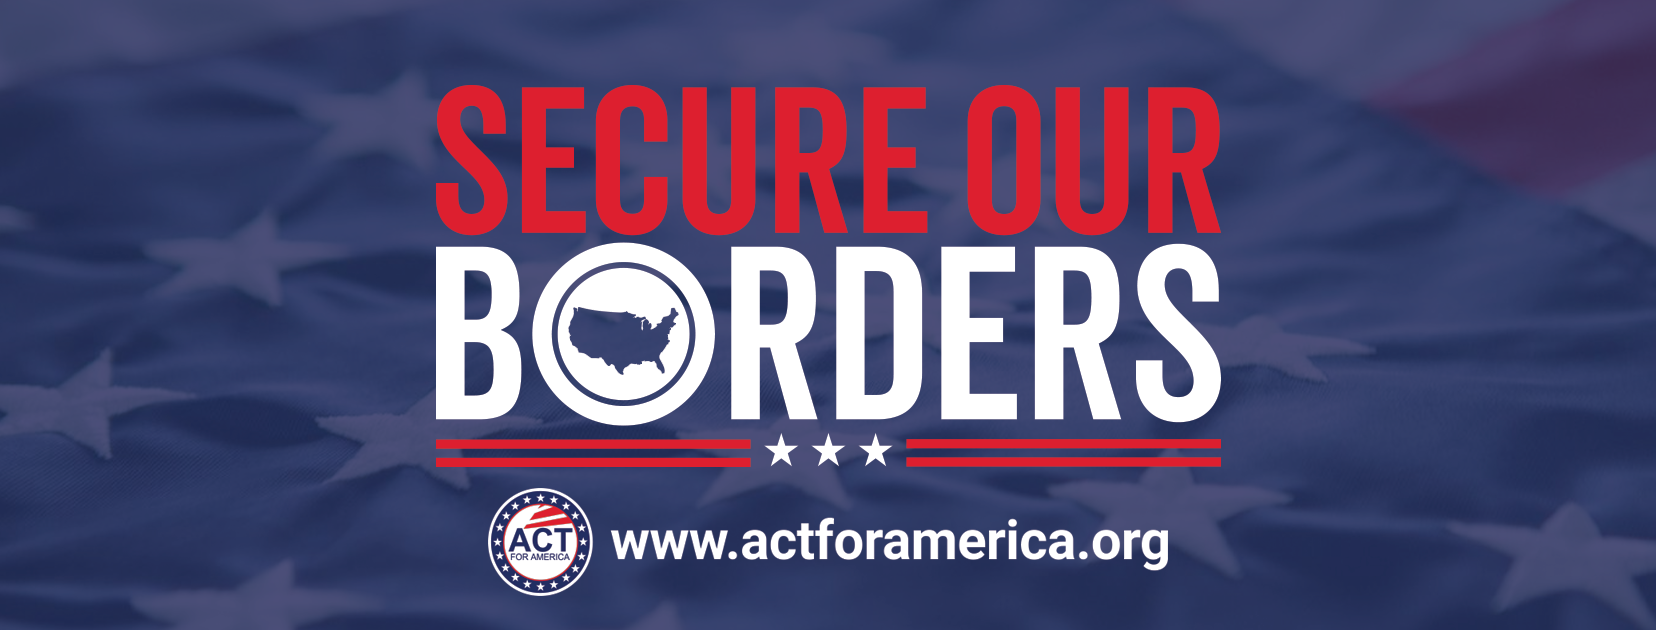 Secure our Borders